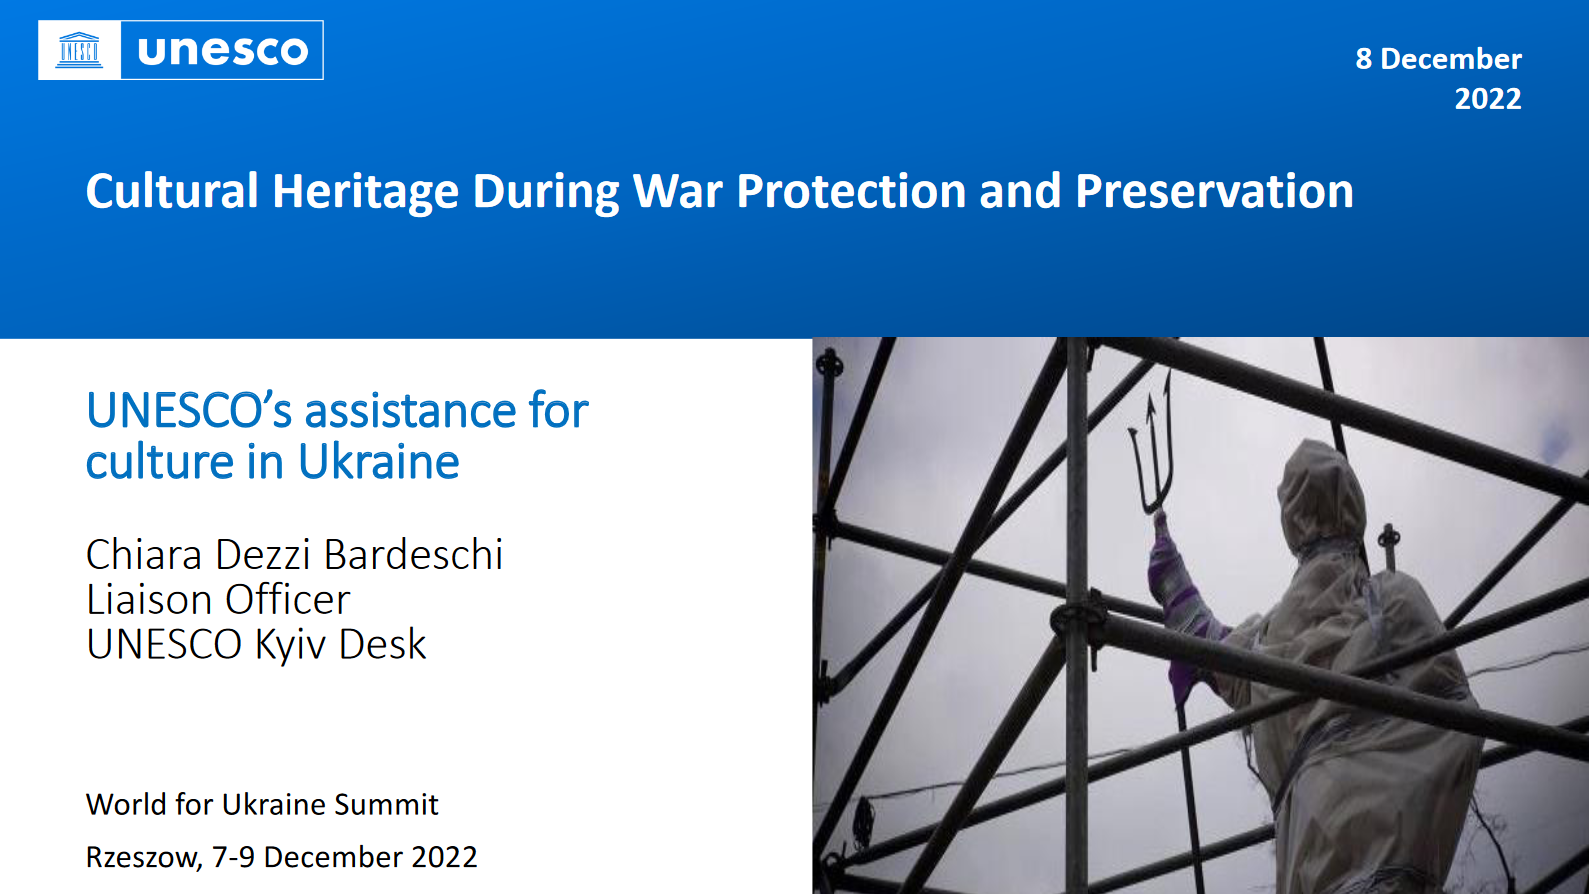 Presentation of UNESCO’s work in relation to cultural heritage protection and preservation during war